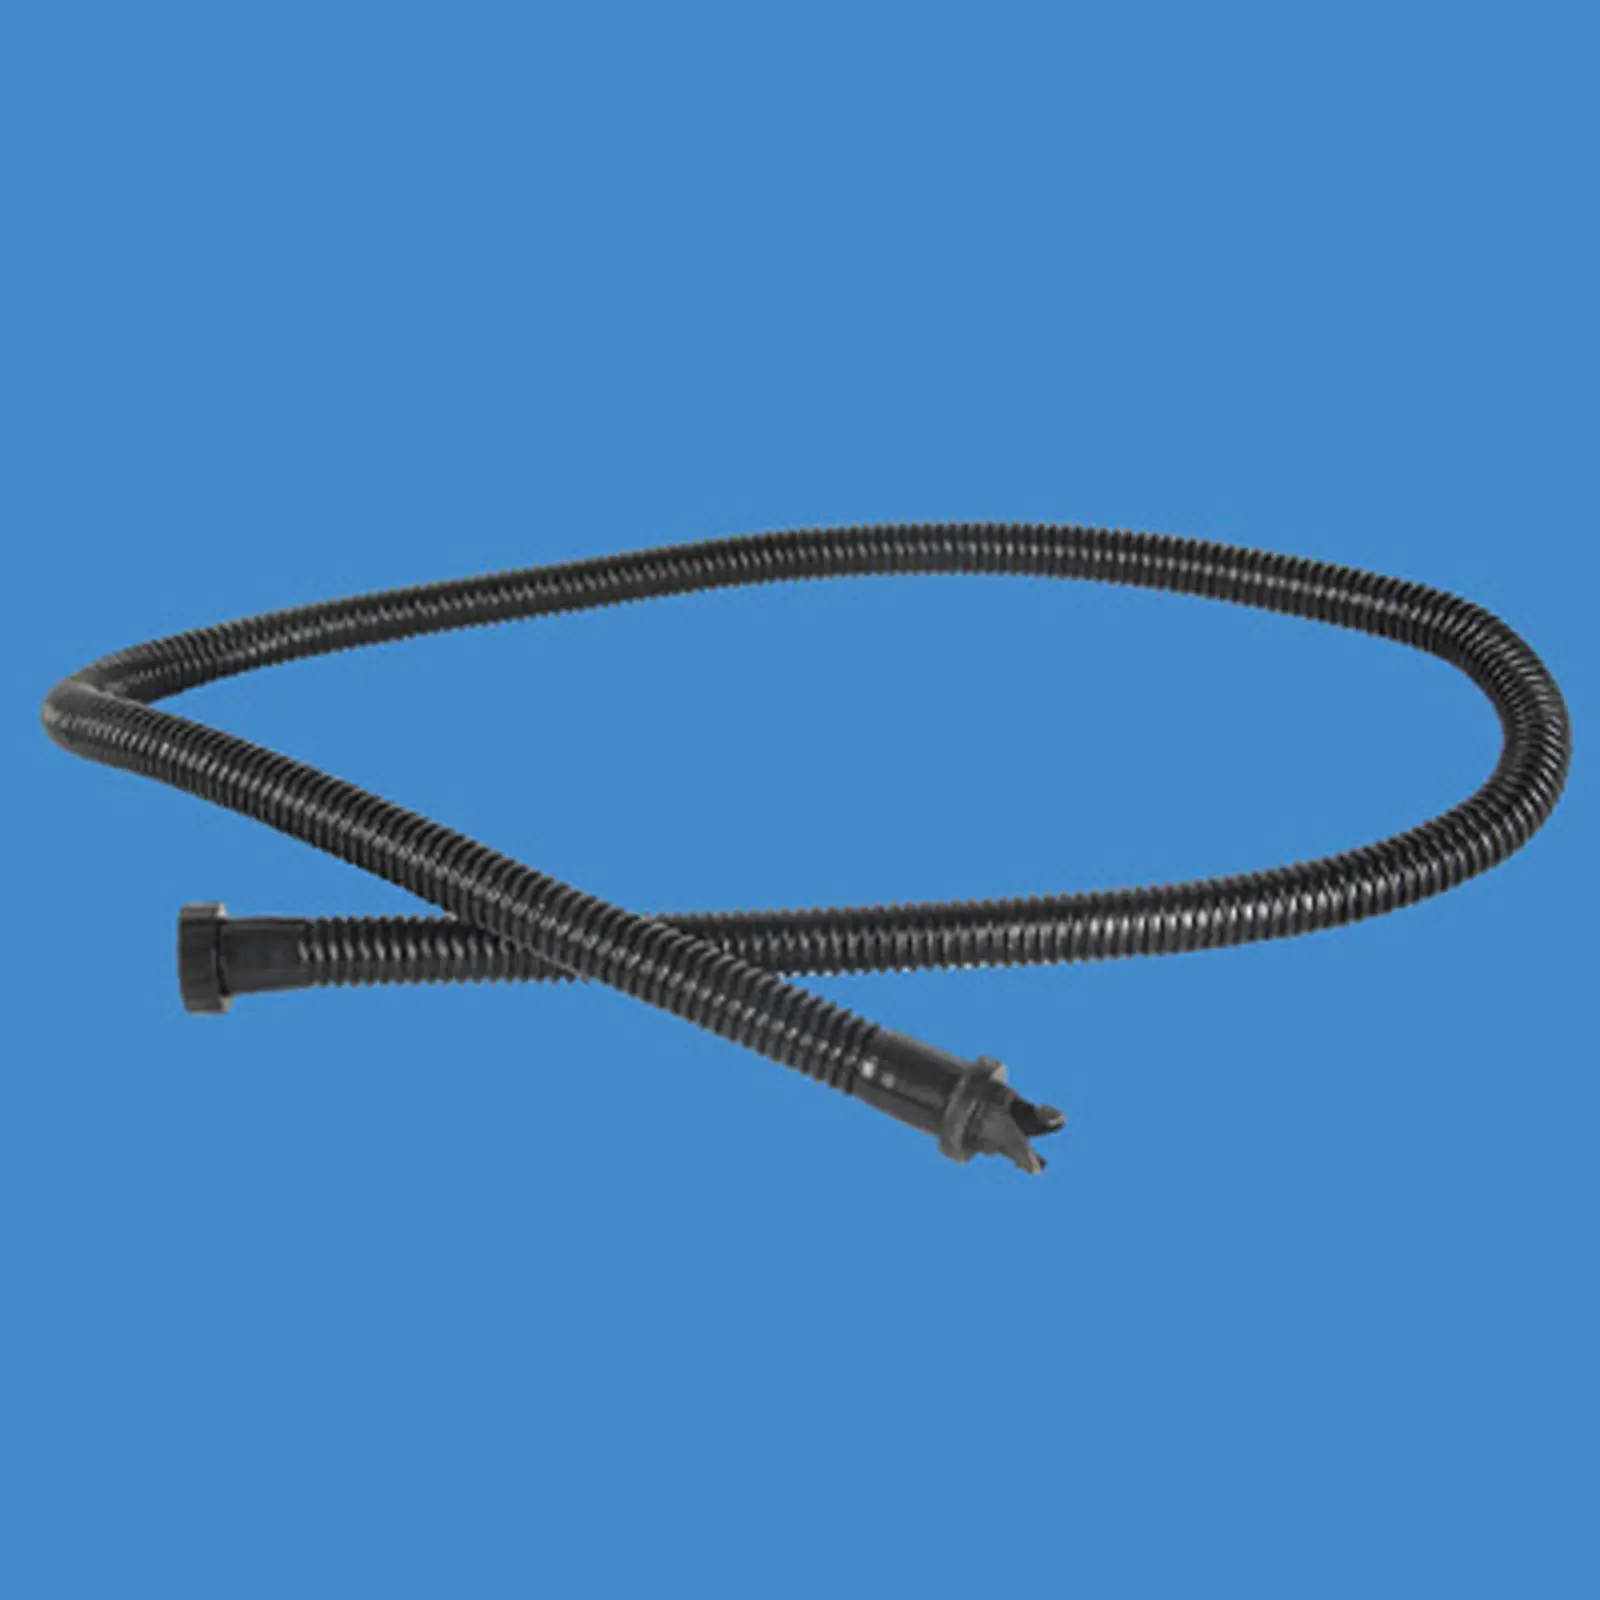 Inflation Pump Hose Pump Equipment Air Pump Hose for Rowing Boat 